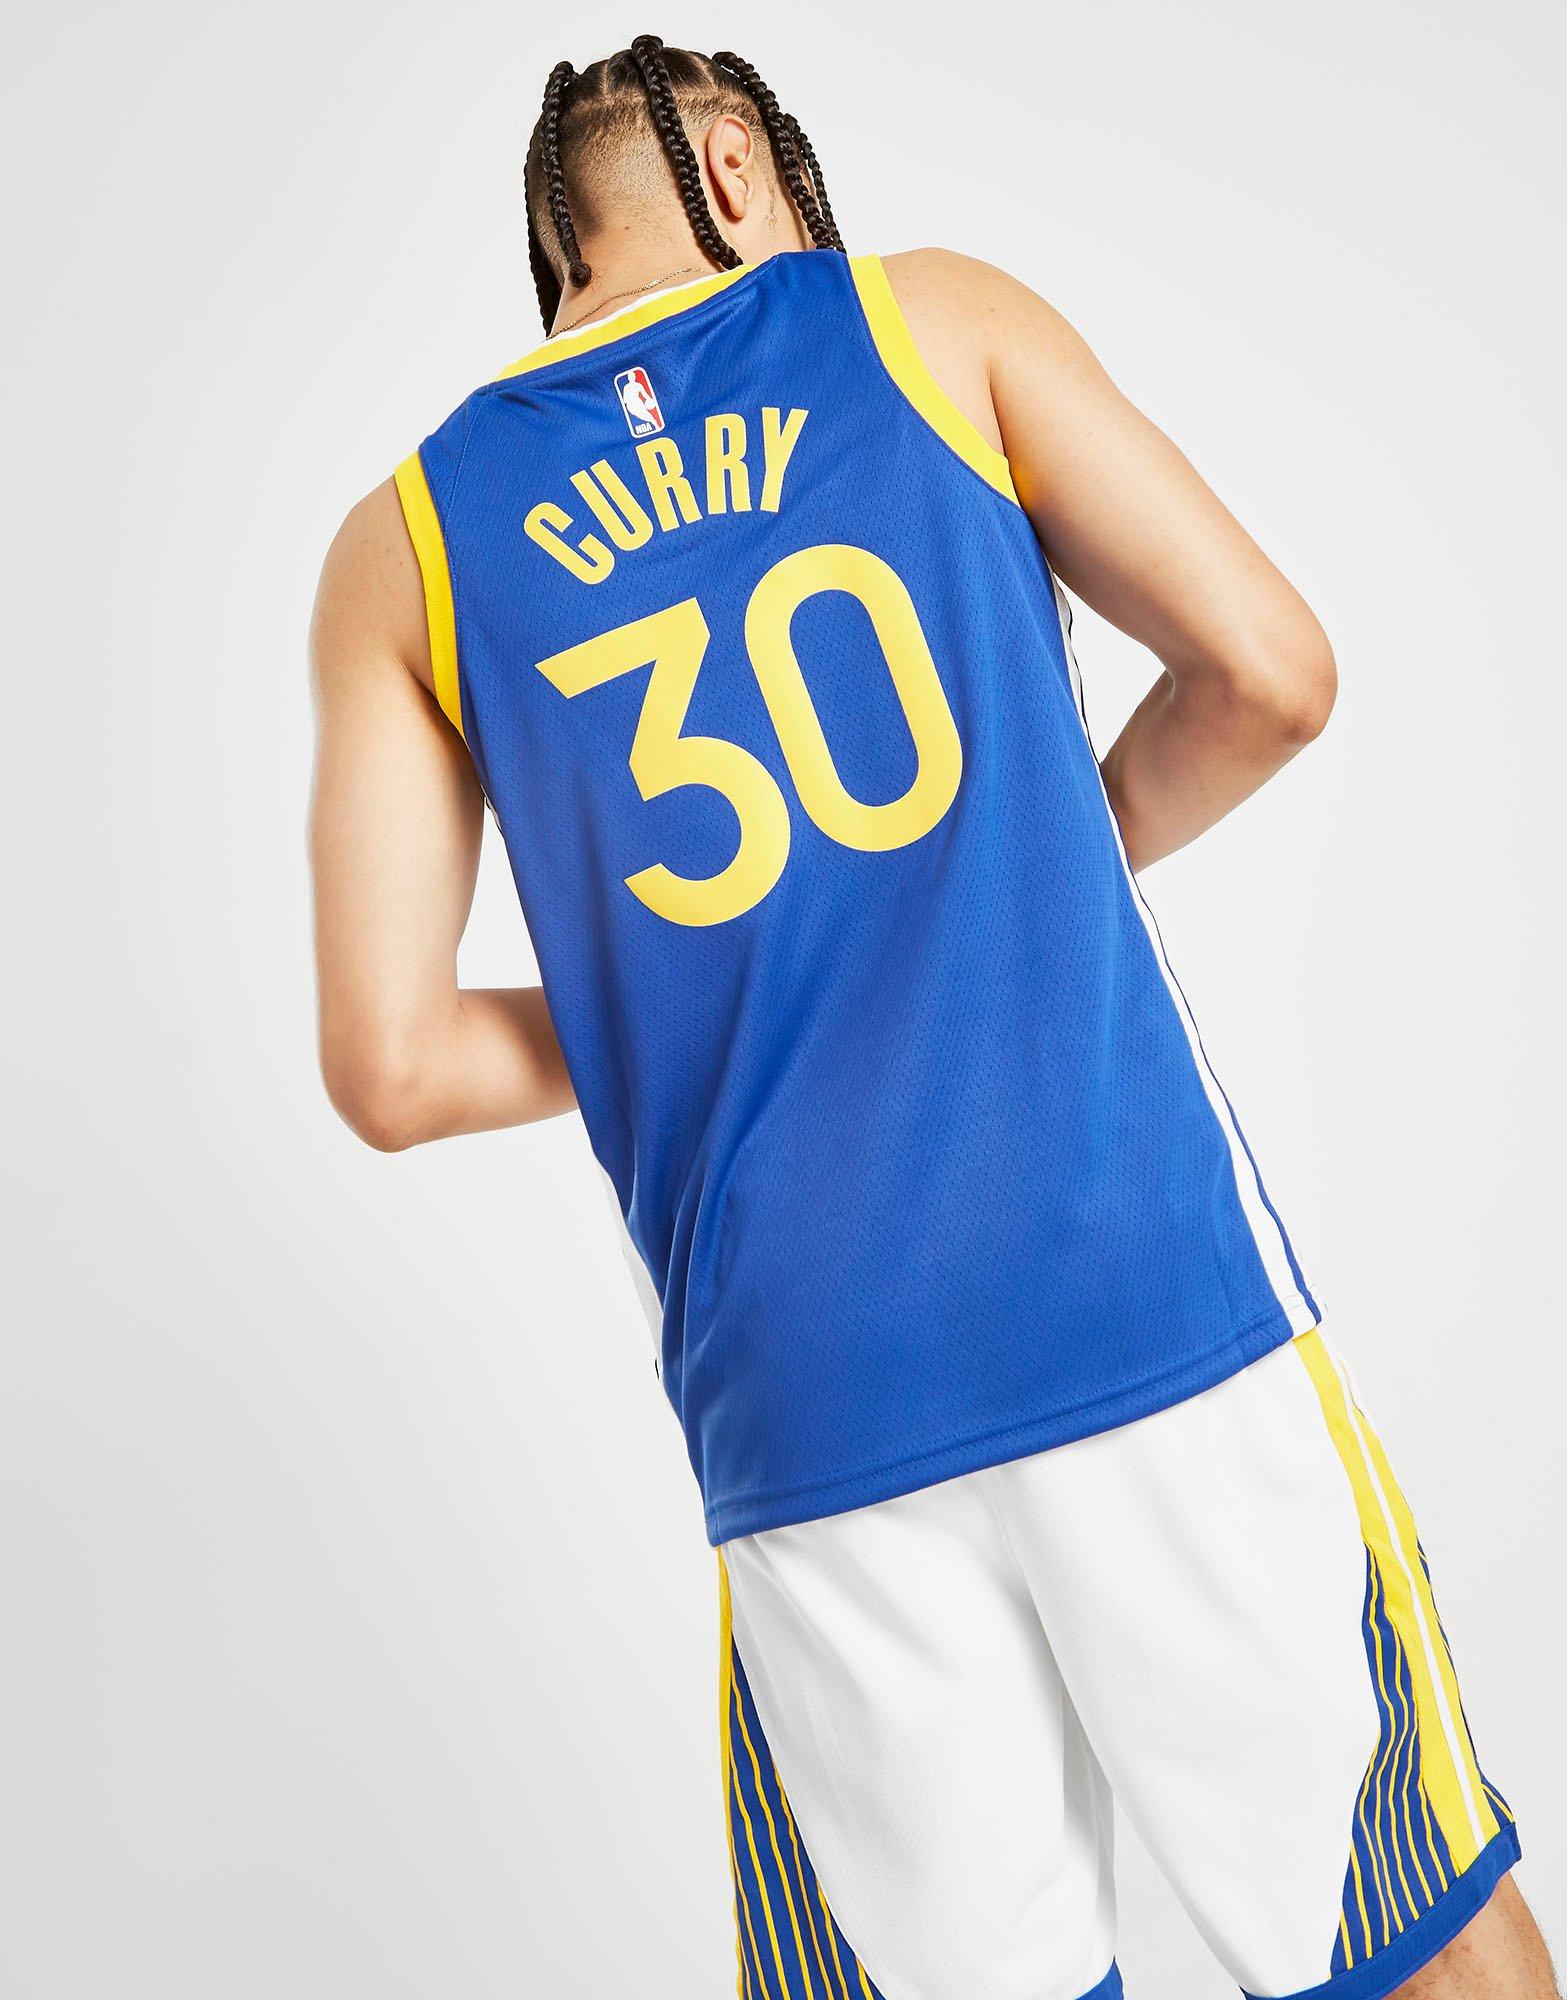 golden state warriors jersey number 30